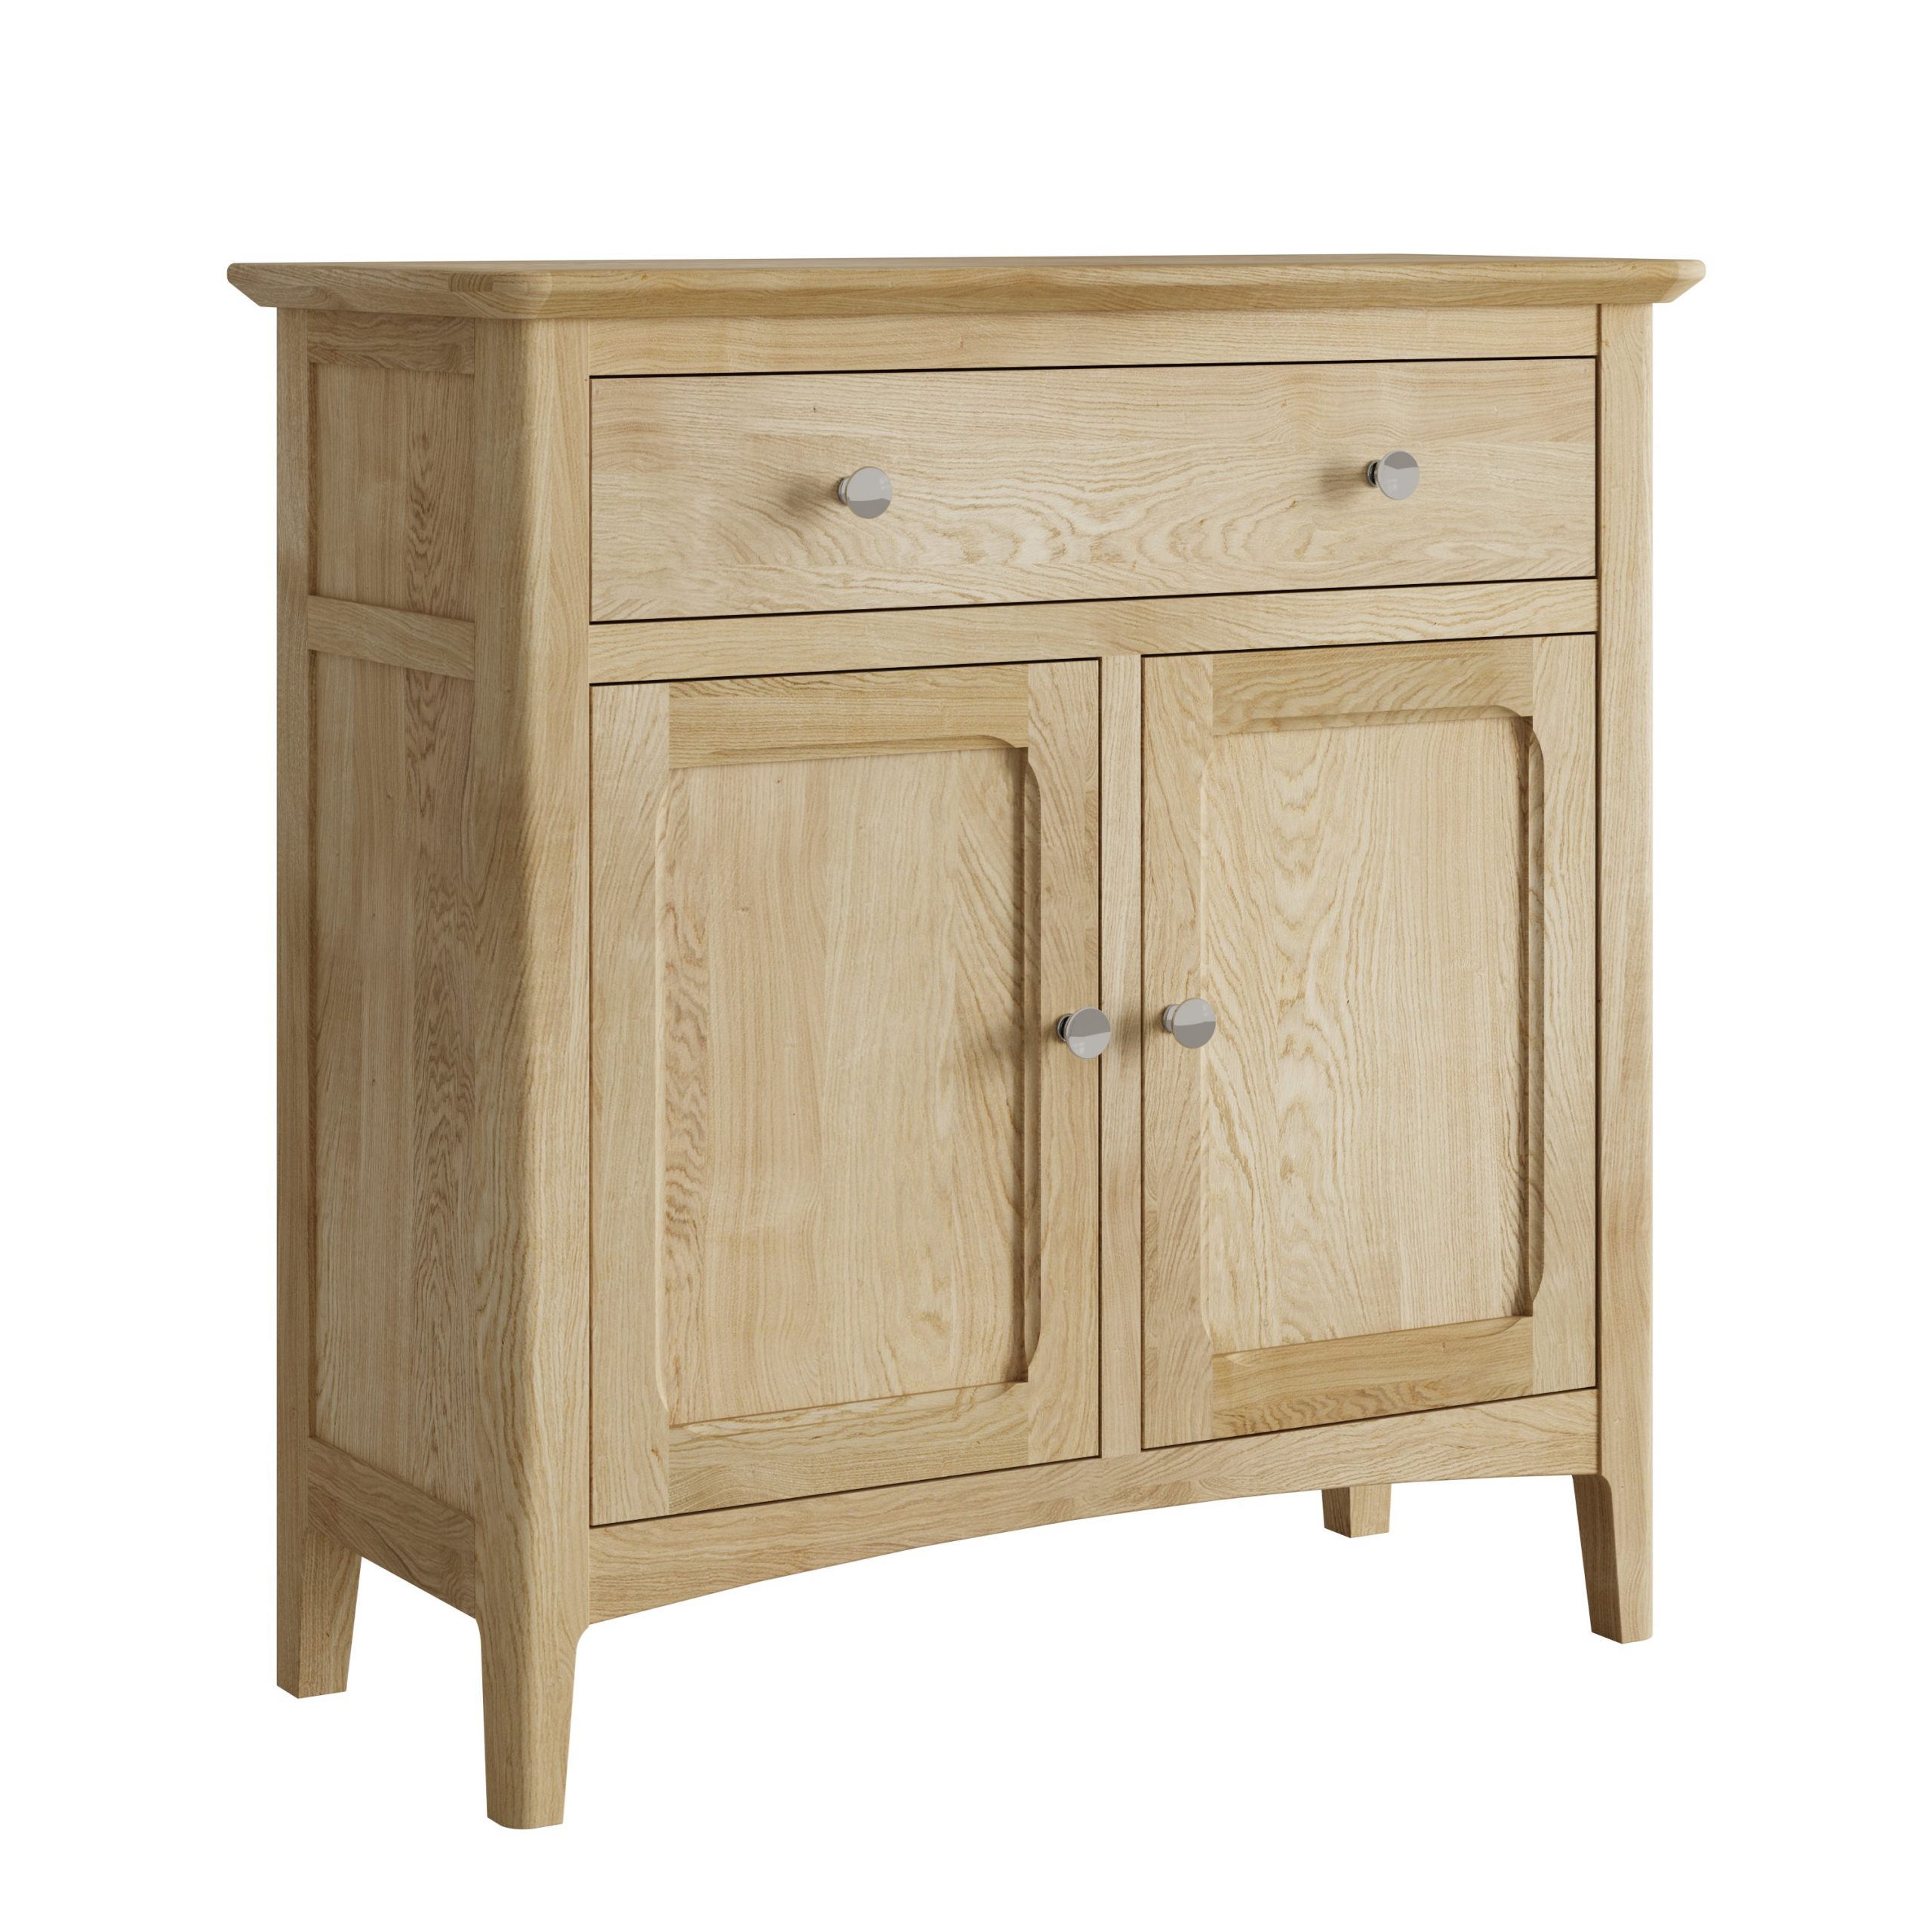 Oak Small 2 Door 1 Drawer Sideboard - Our Price - Only £399